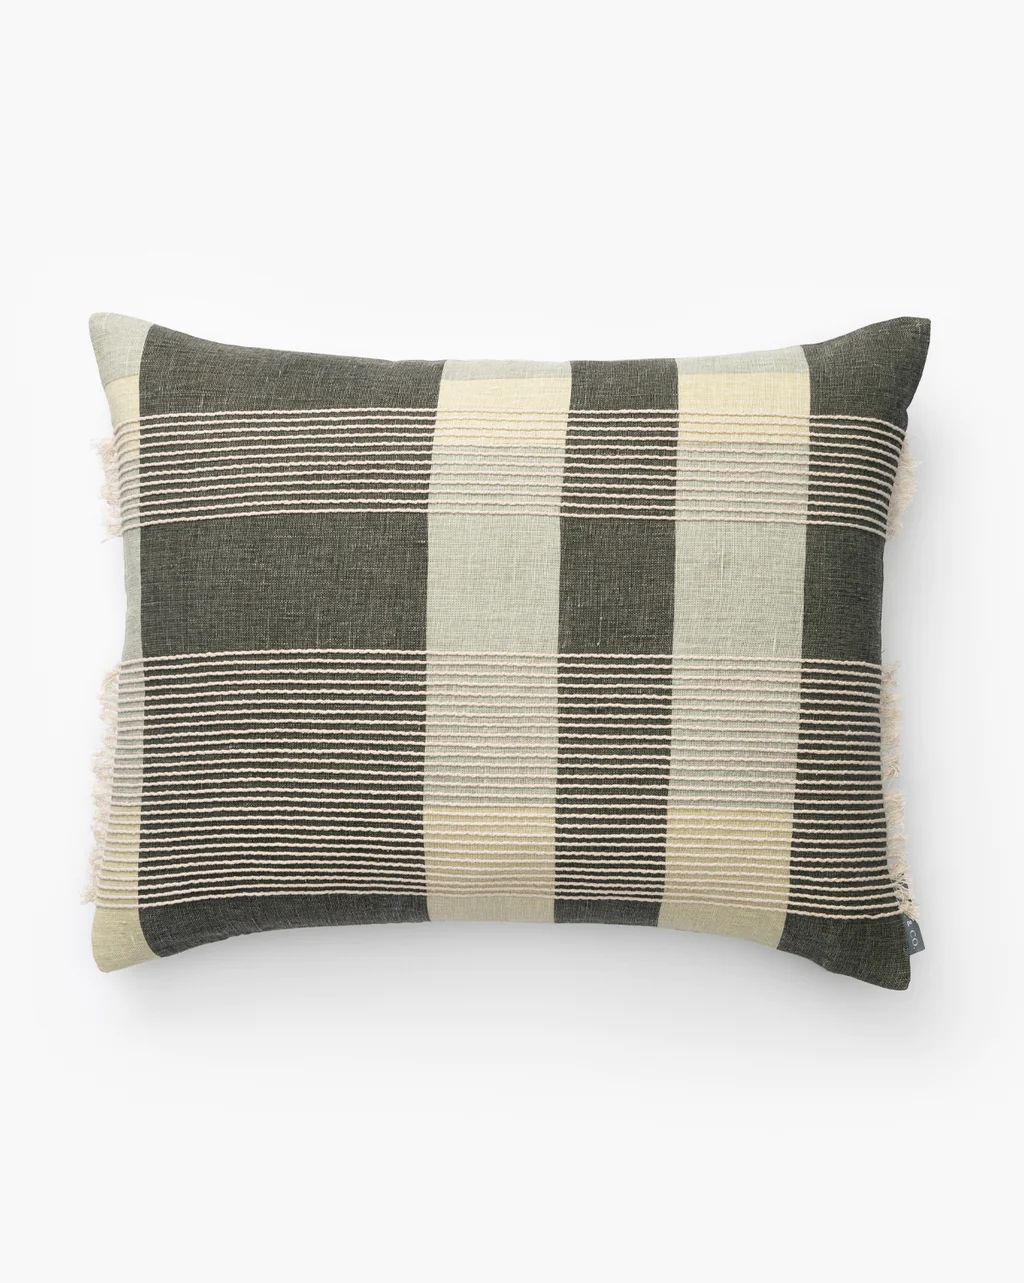 Henderson Pillow Cover | McGee & Co.